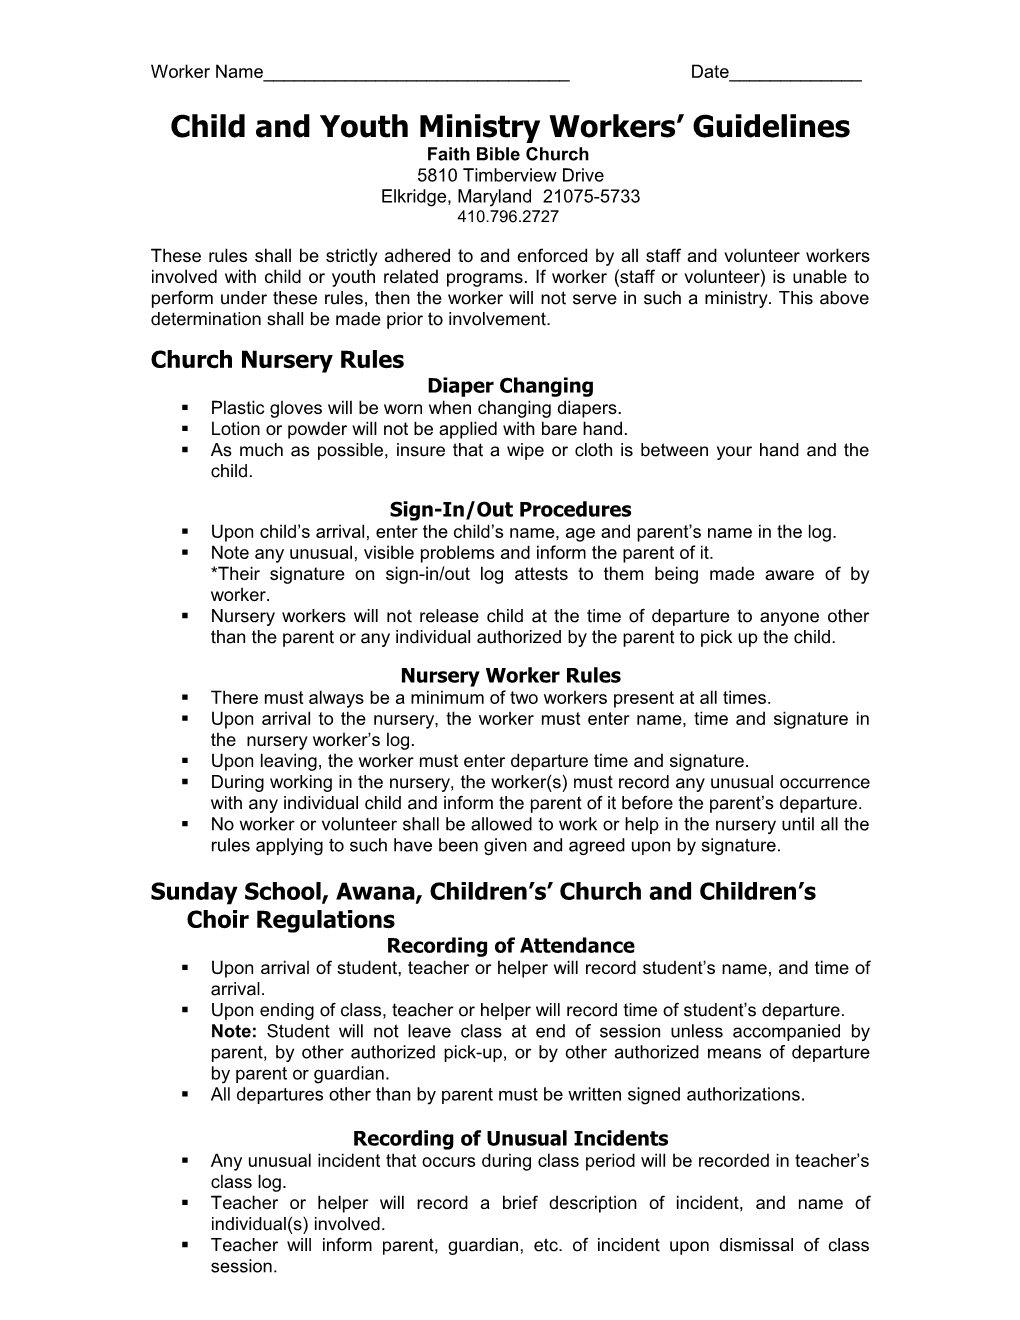 Child and Youth Ministry Workers Guidelines